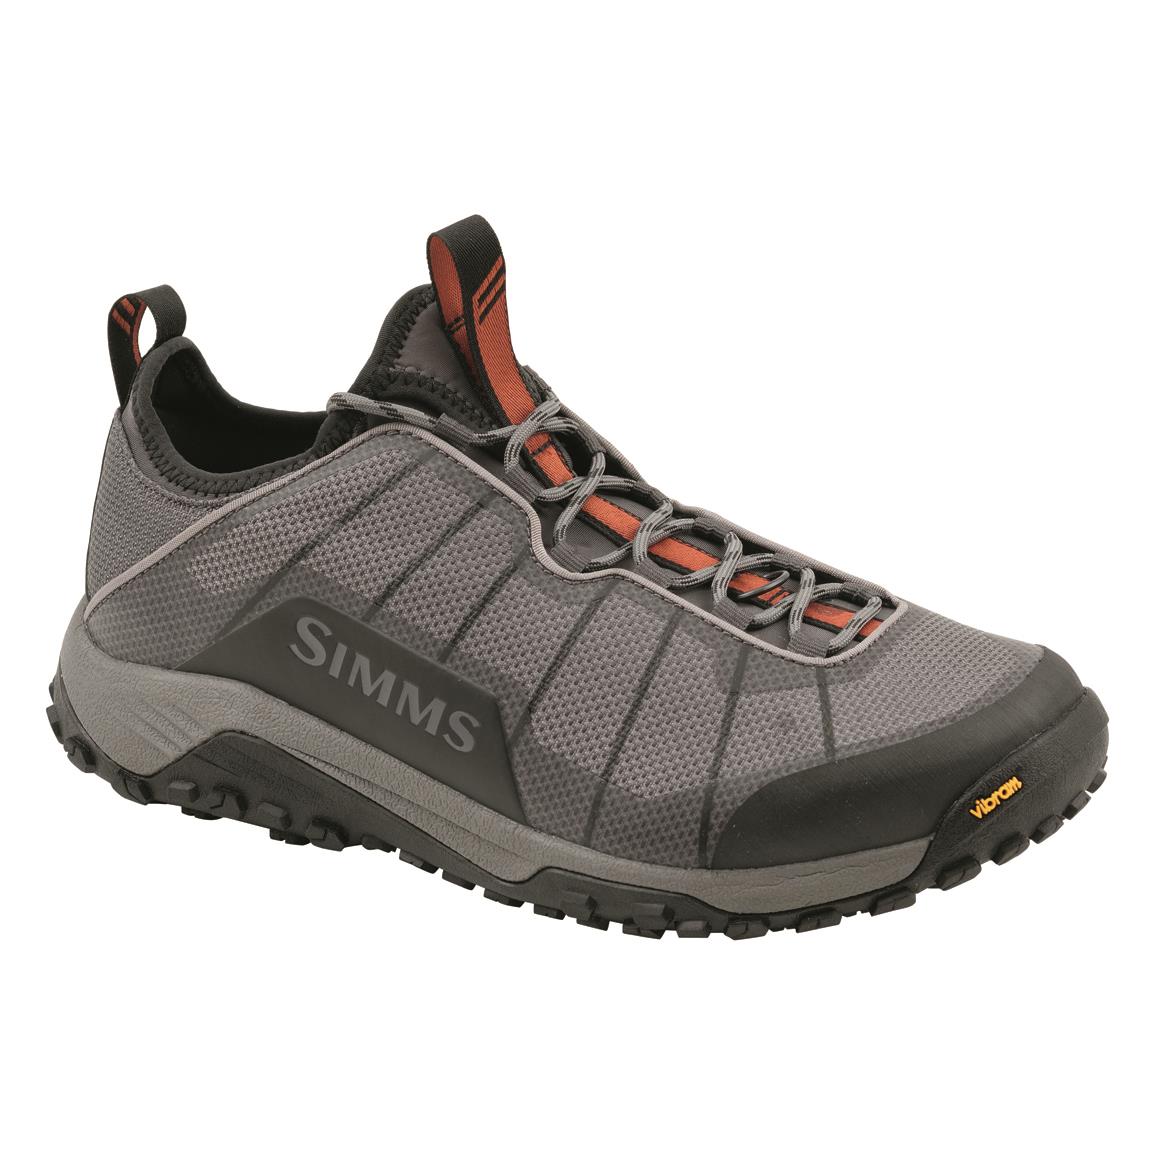 Simms Men's Flyweight Wet Wading Shoes, Rubber Sole, Slate